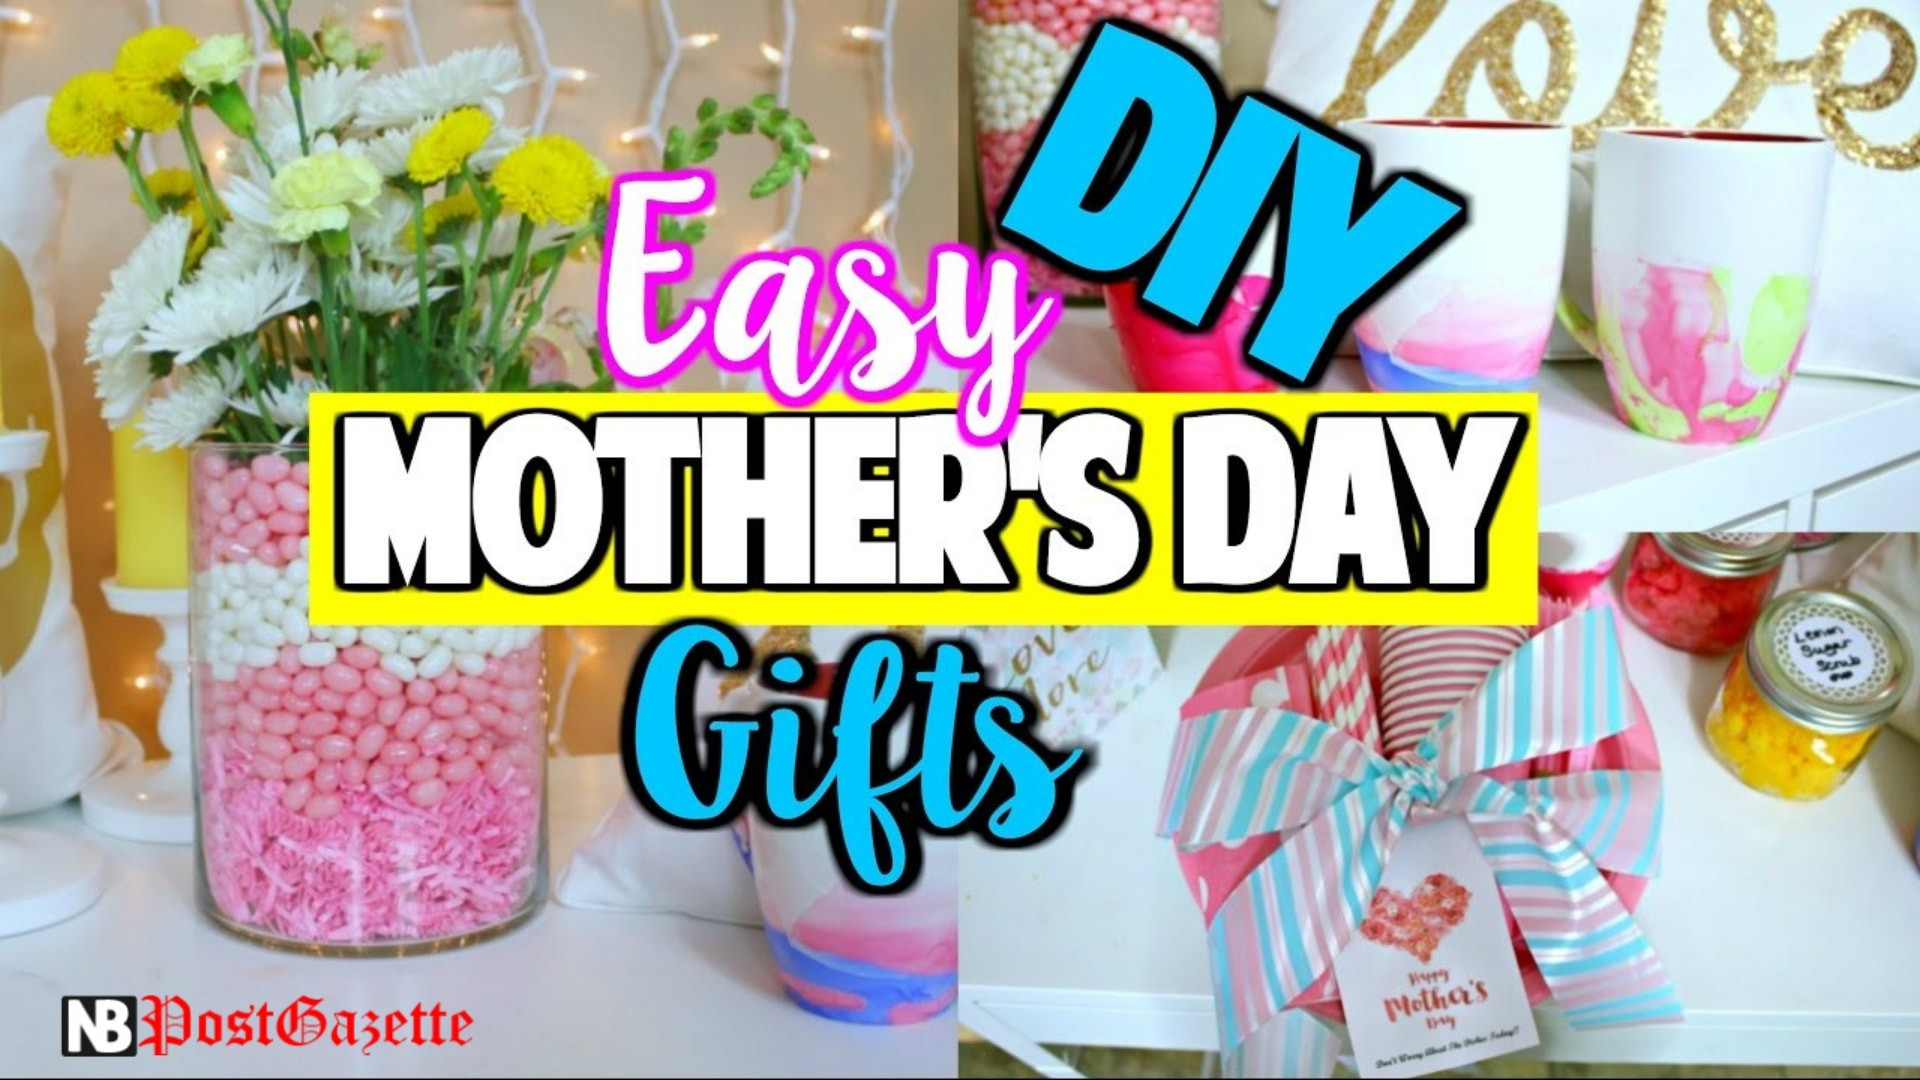 Best Last Minute Mother's Day Gifts
 These Are The Best Last Minute Mother s Day Gift Ideas 2019